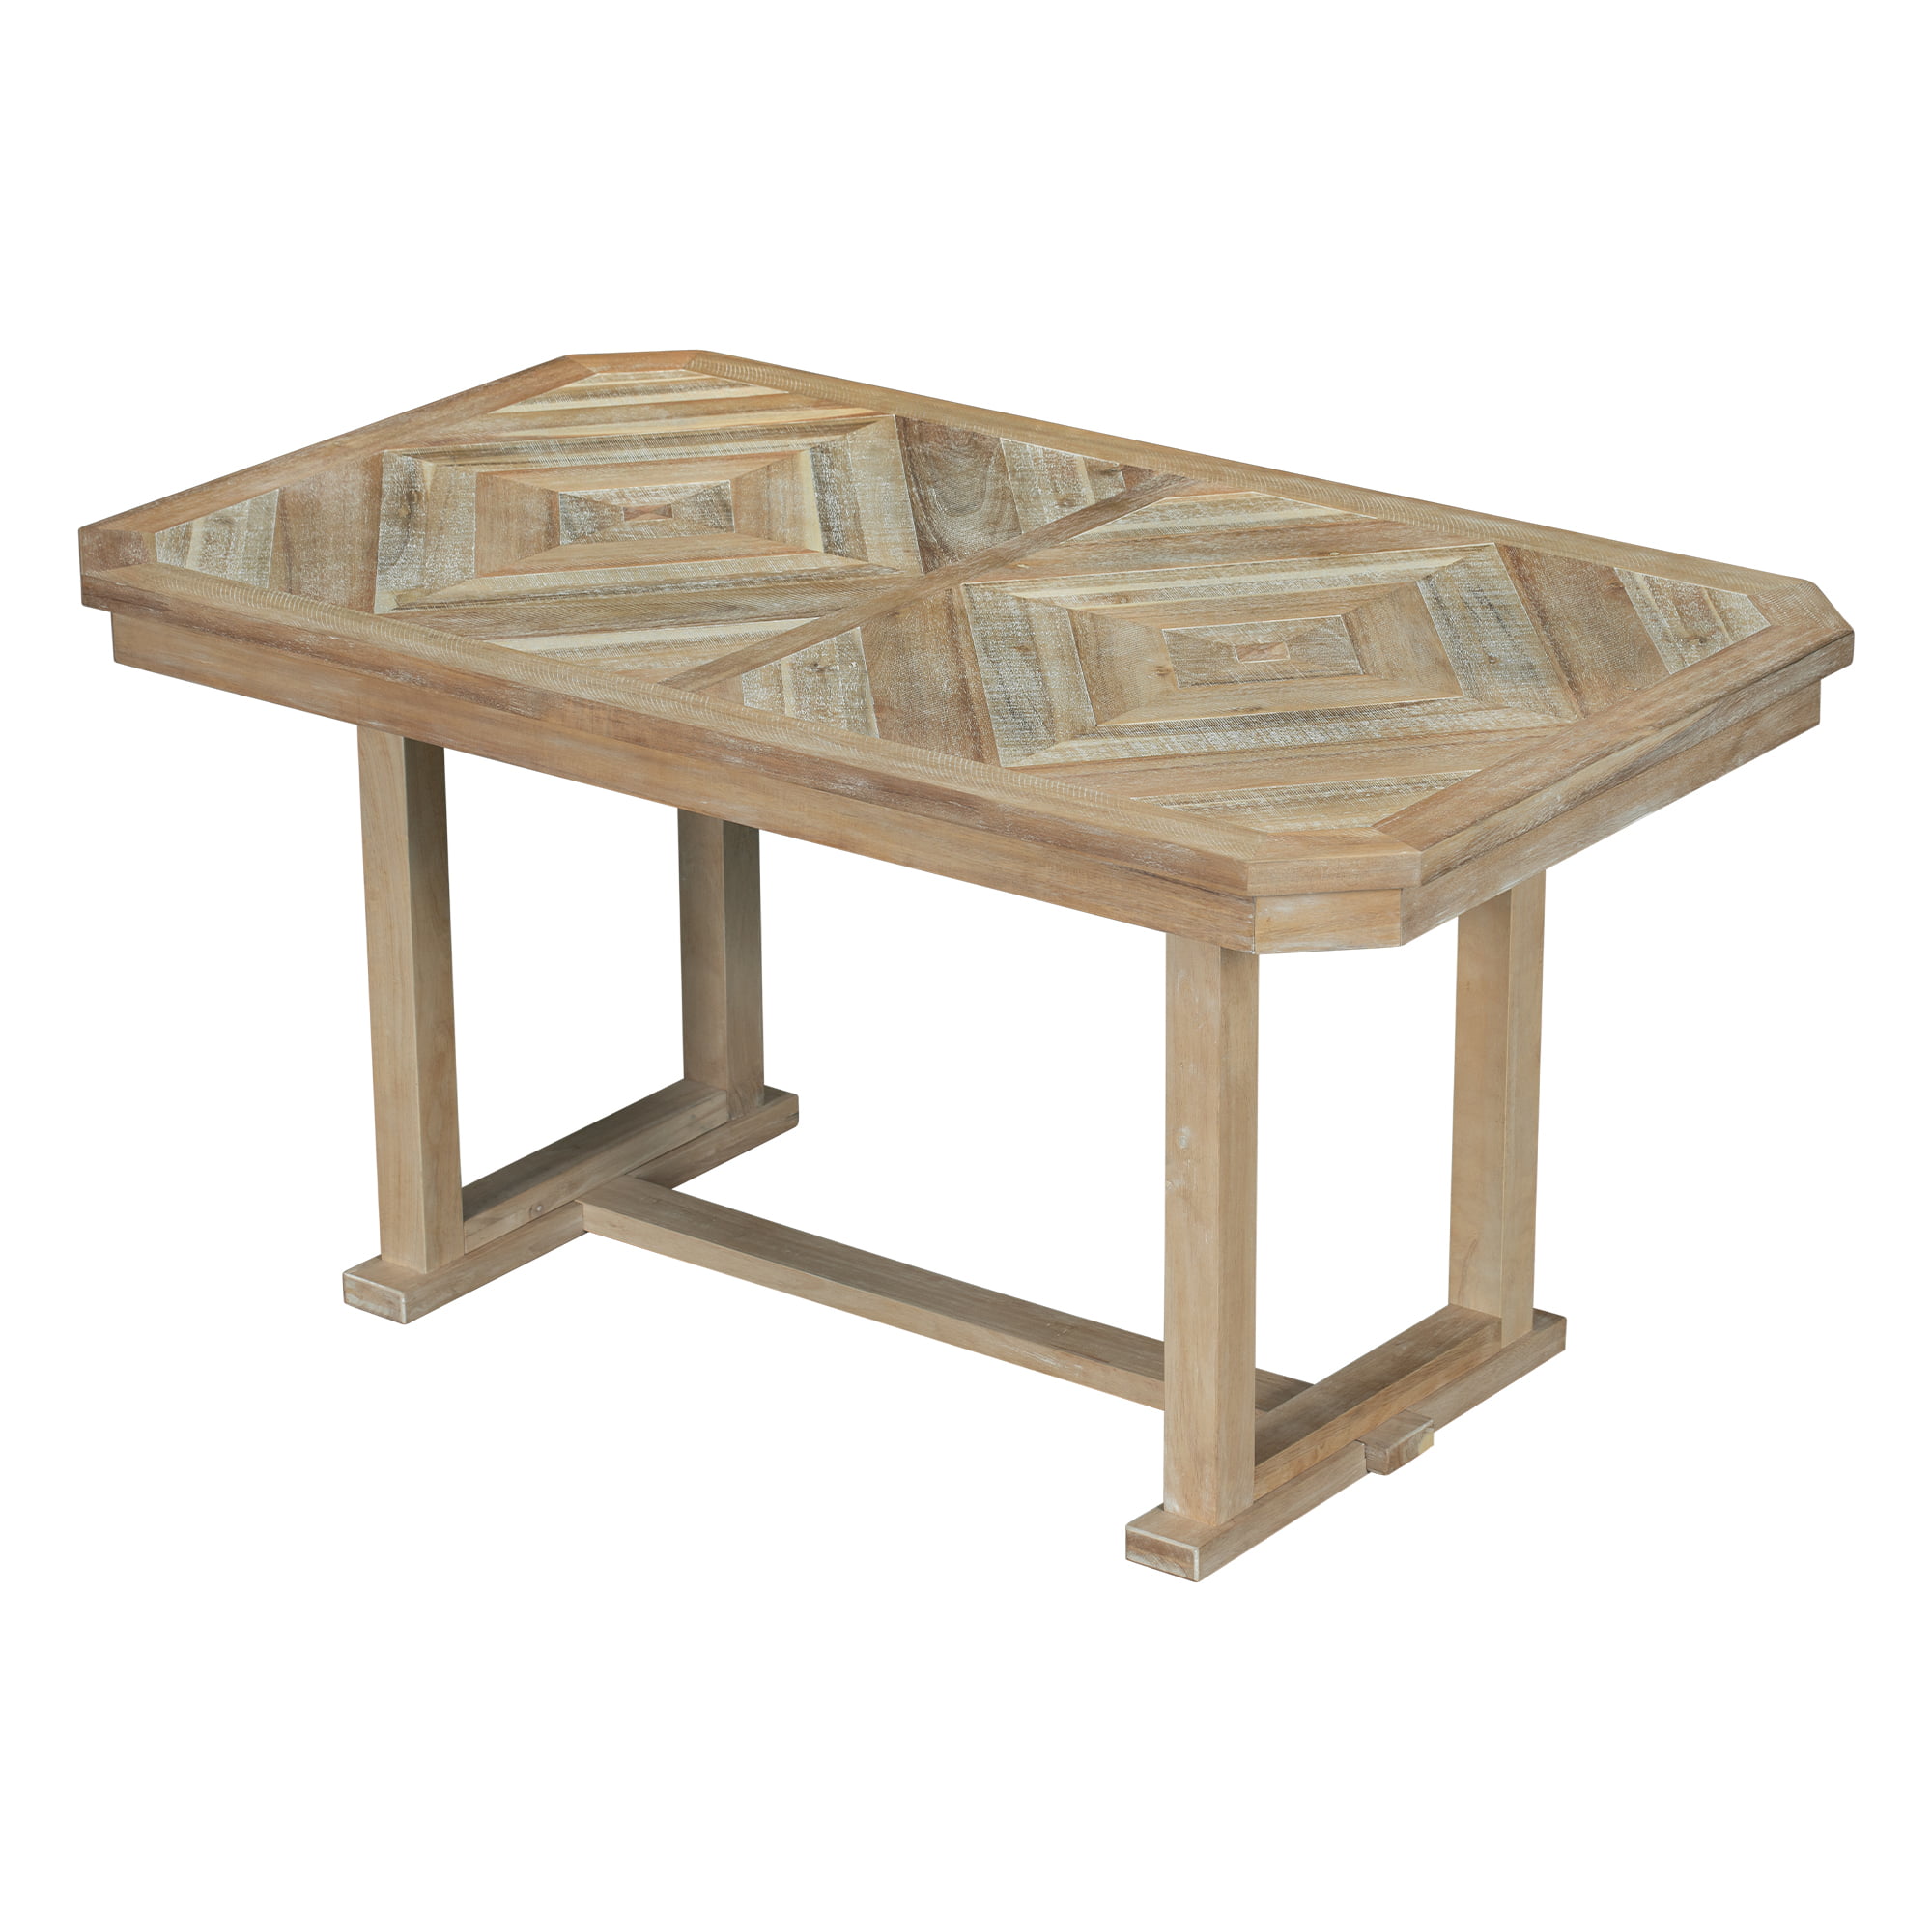 6-Piece Rubber Wood Dining Table Set - ST000049AAD